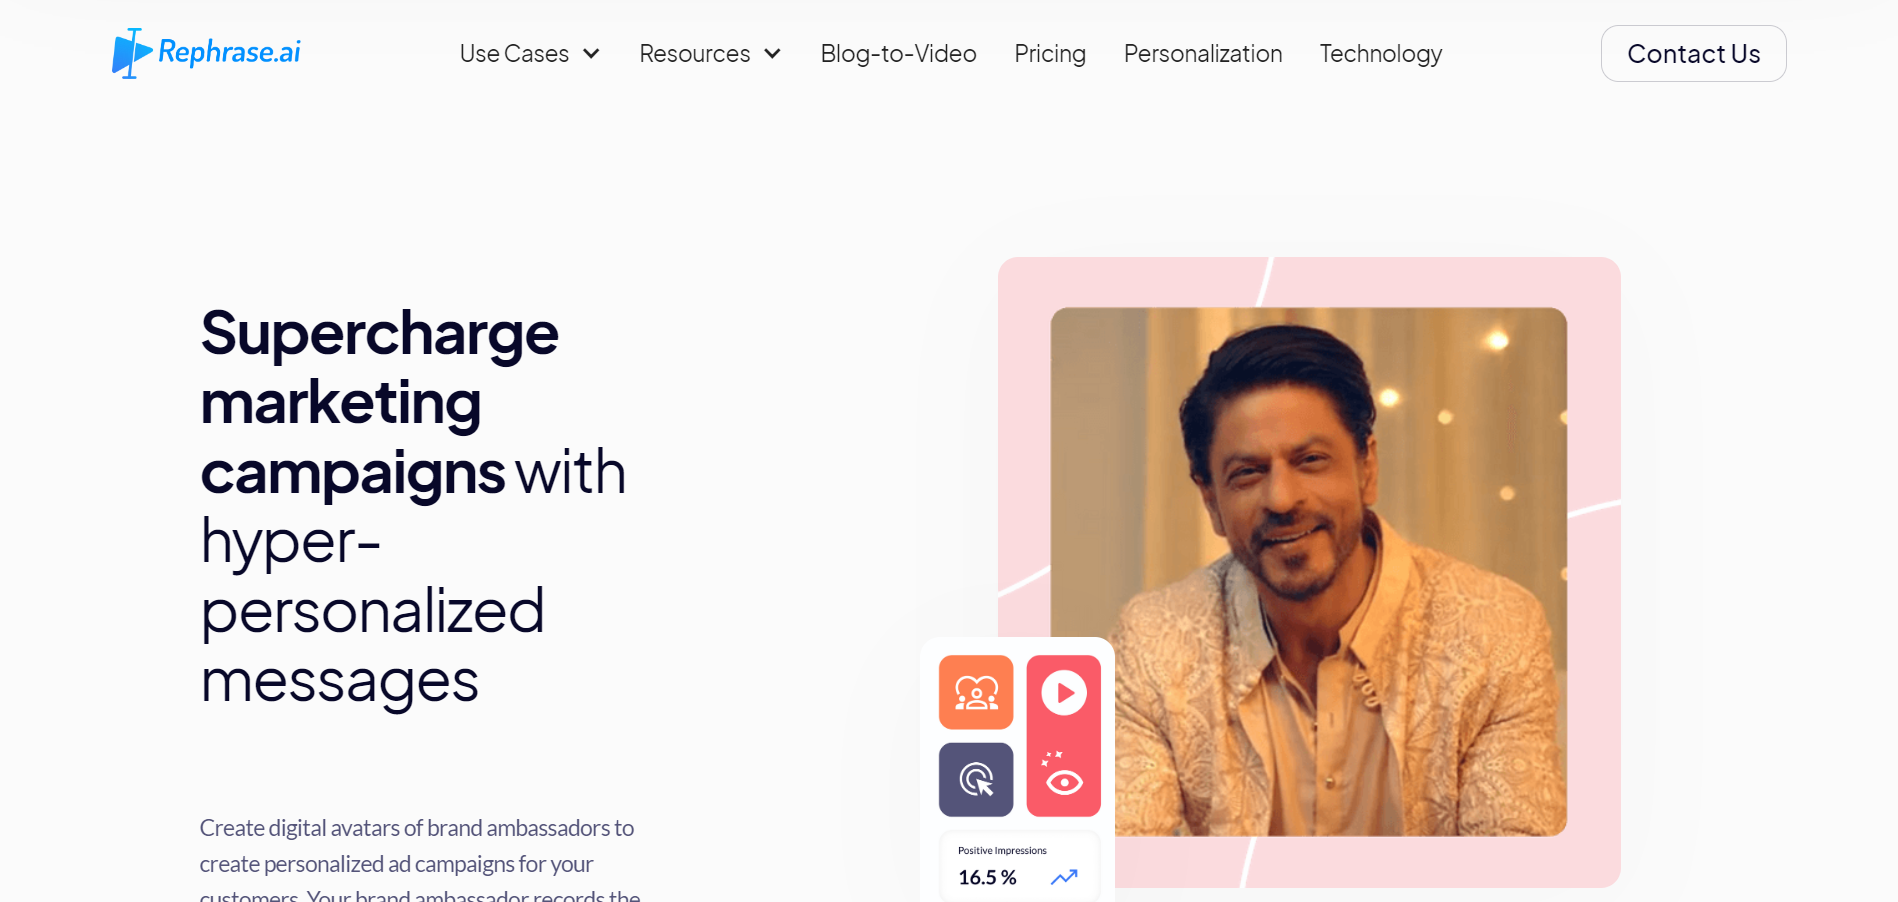 Rephrase uses artificial intelligence to streamline your video creation